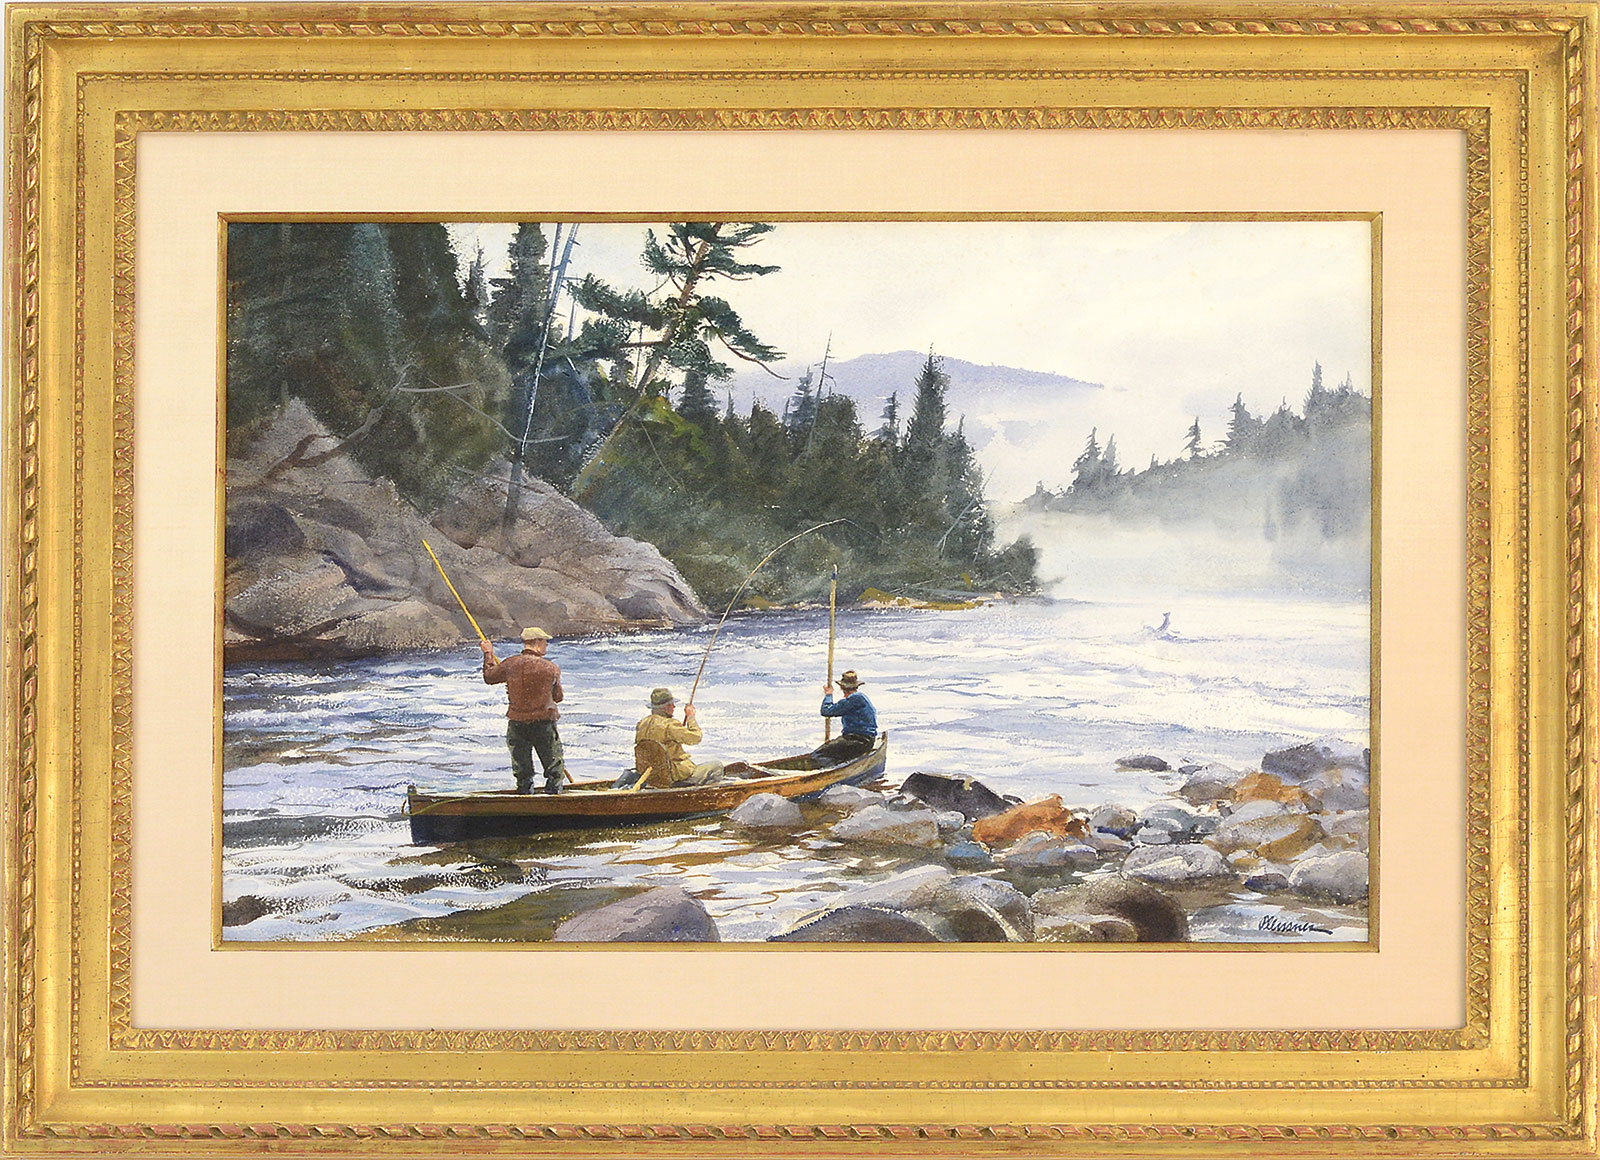 Ogden Minton Pleissner (American, 1905-1983) "A Big One Hooked", estimated at $80,000-120,000.